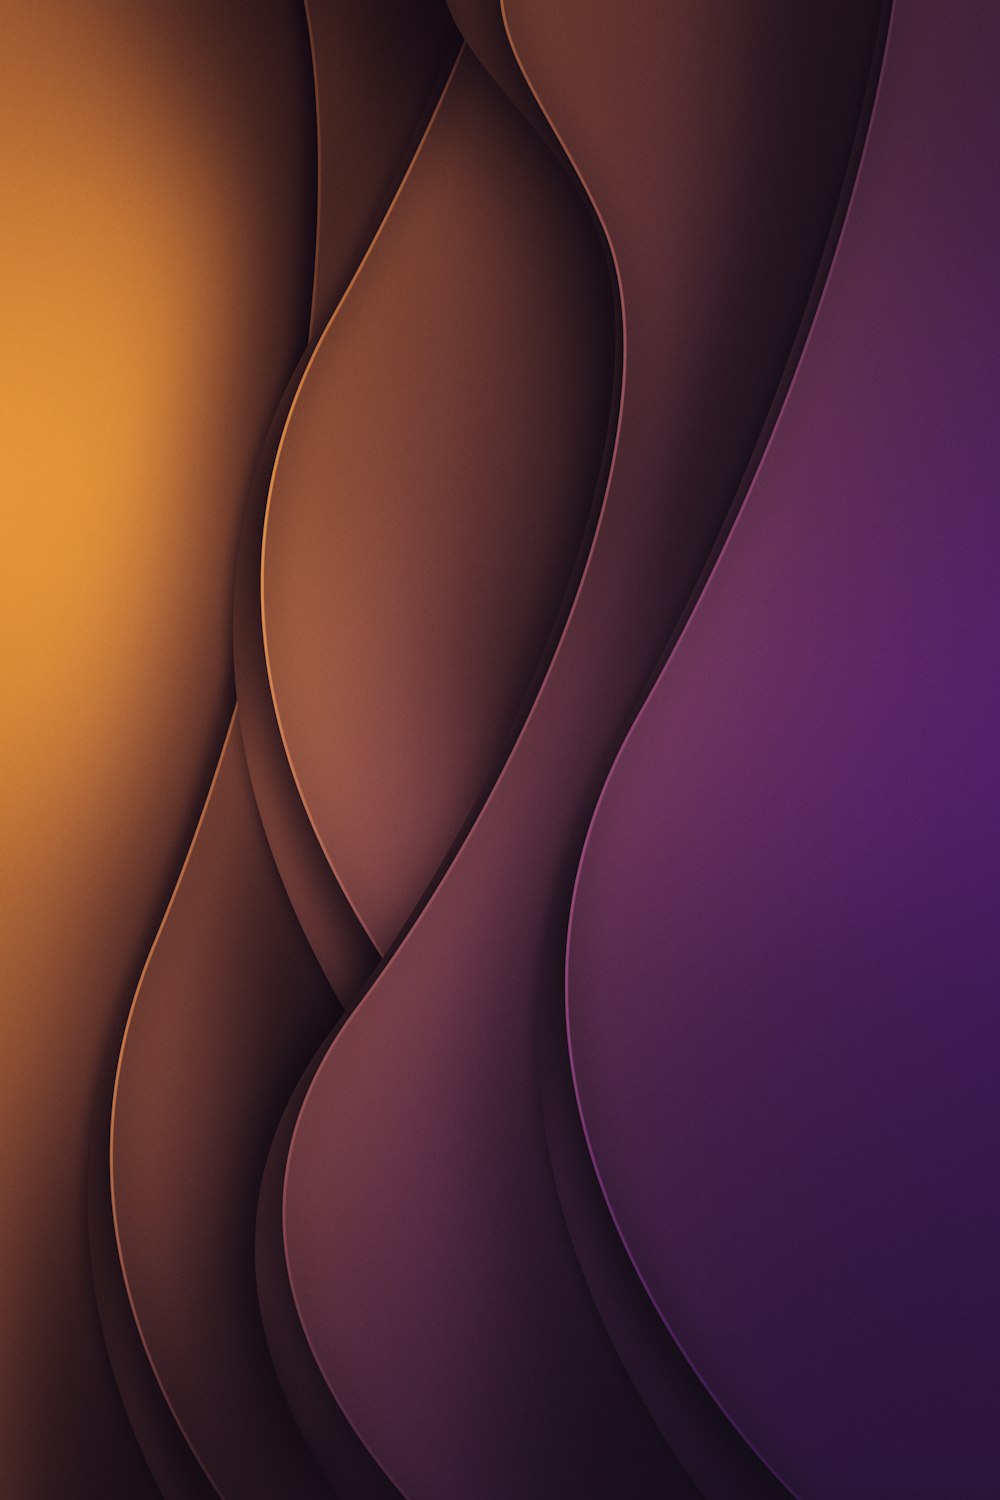 a purple and orange abstract background with curves